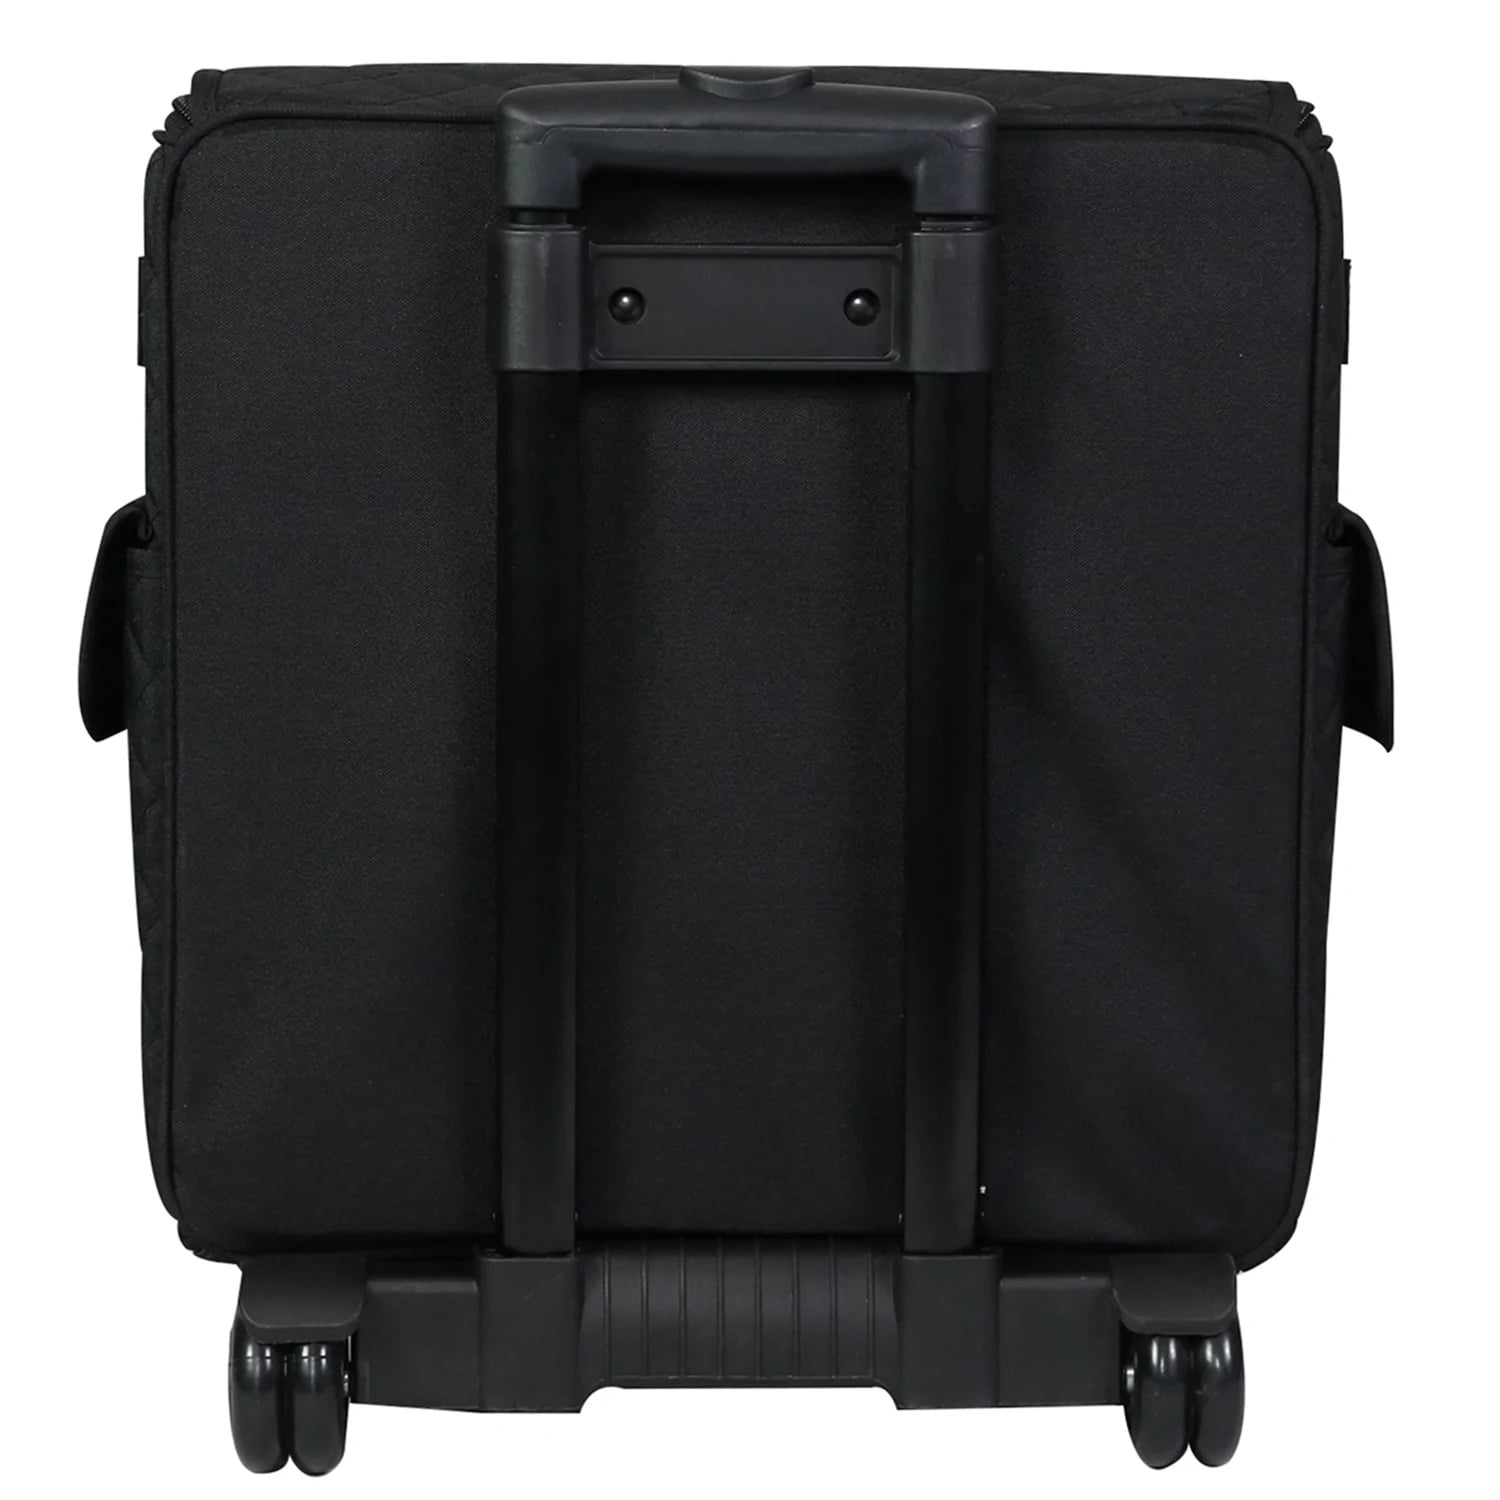 15in Wheeled Serger Hard Case - Black : Sewing Parts Online